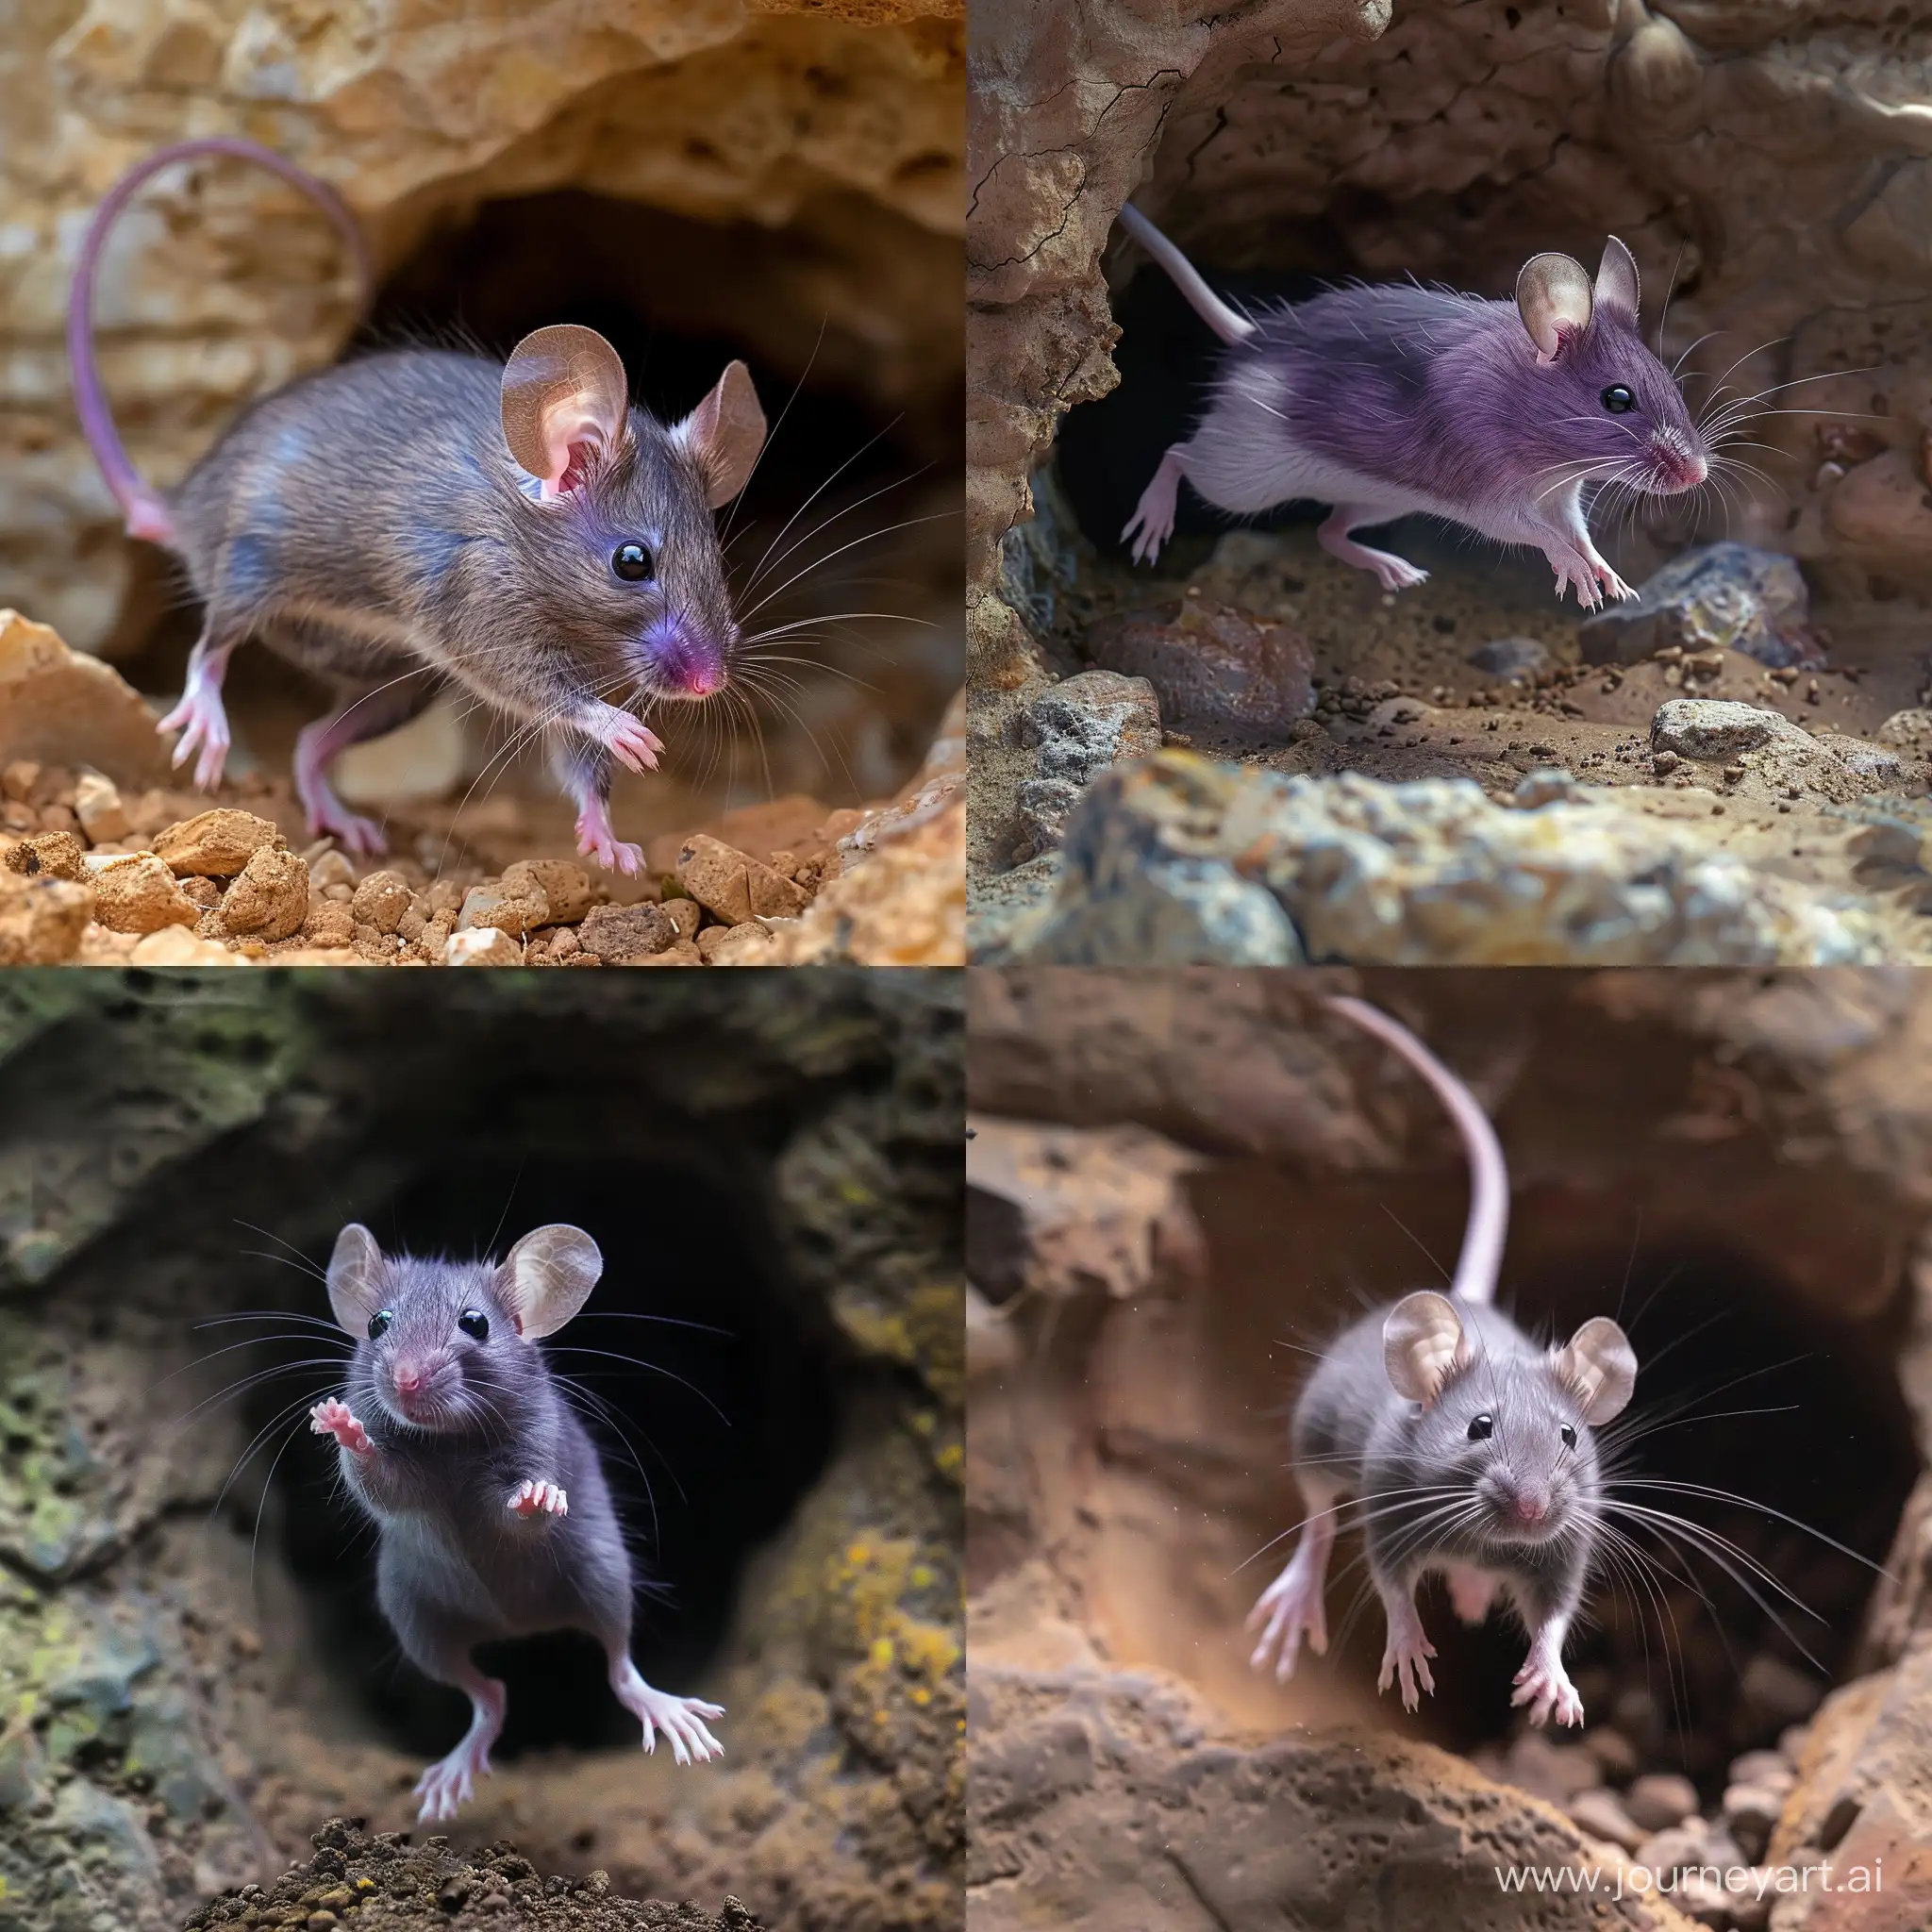 Playful-GreyPurple-Mouse-Leaping-into-Burrow